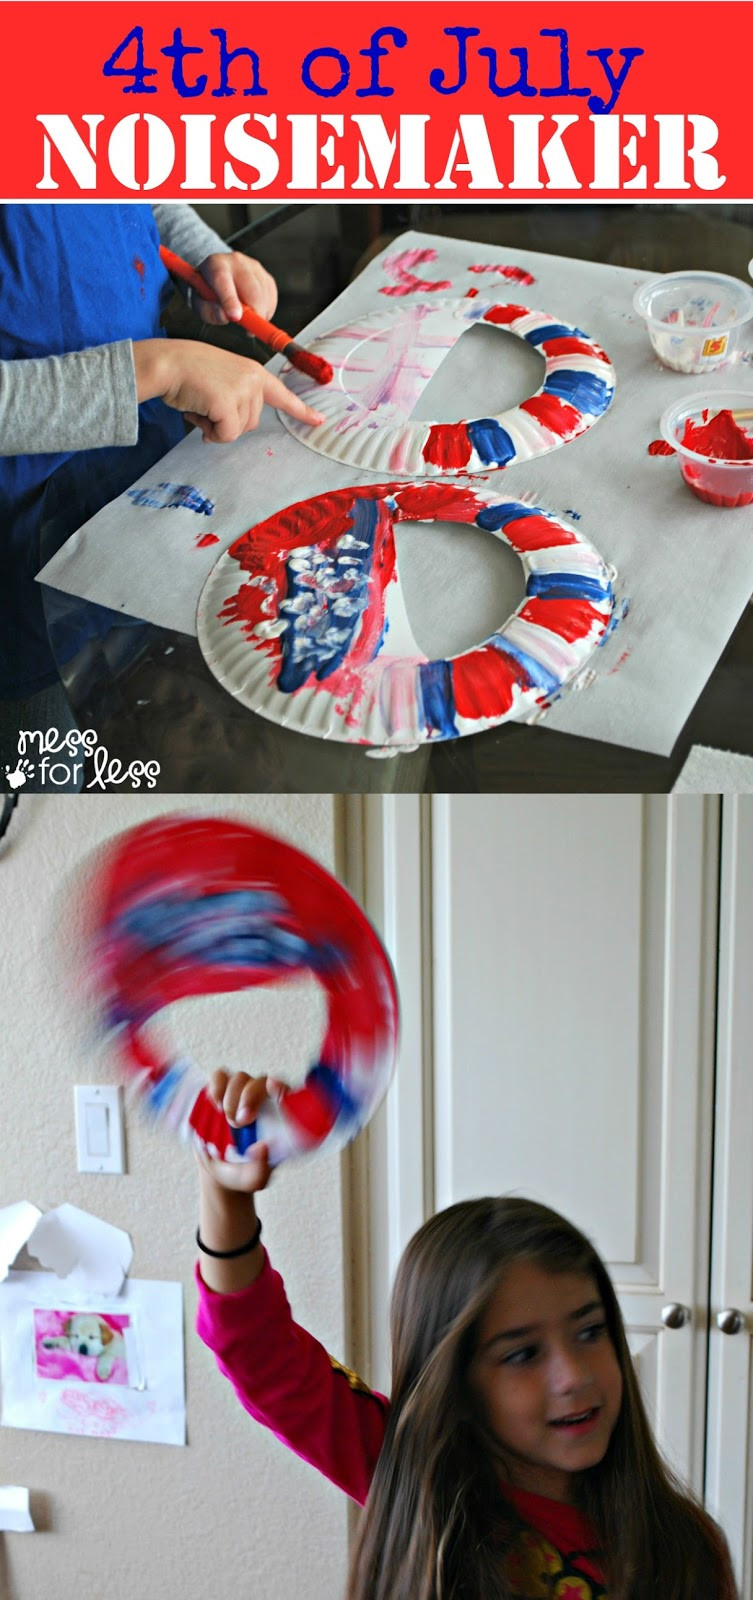 Fourth Of July Art Projects For Preschoolers
 4th of July Craft Noisemaker Mess for Less